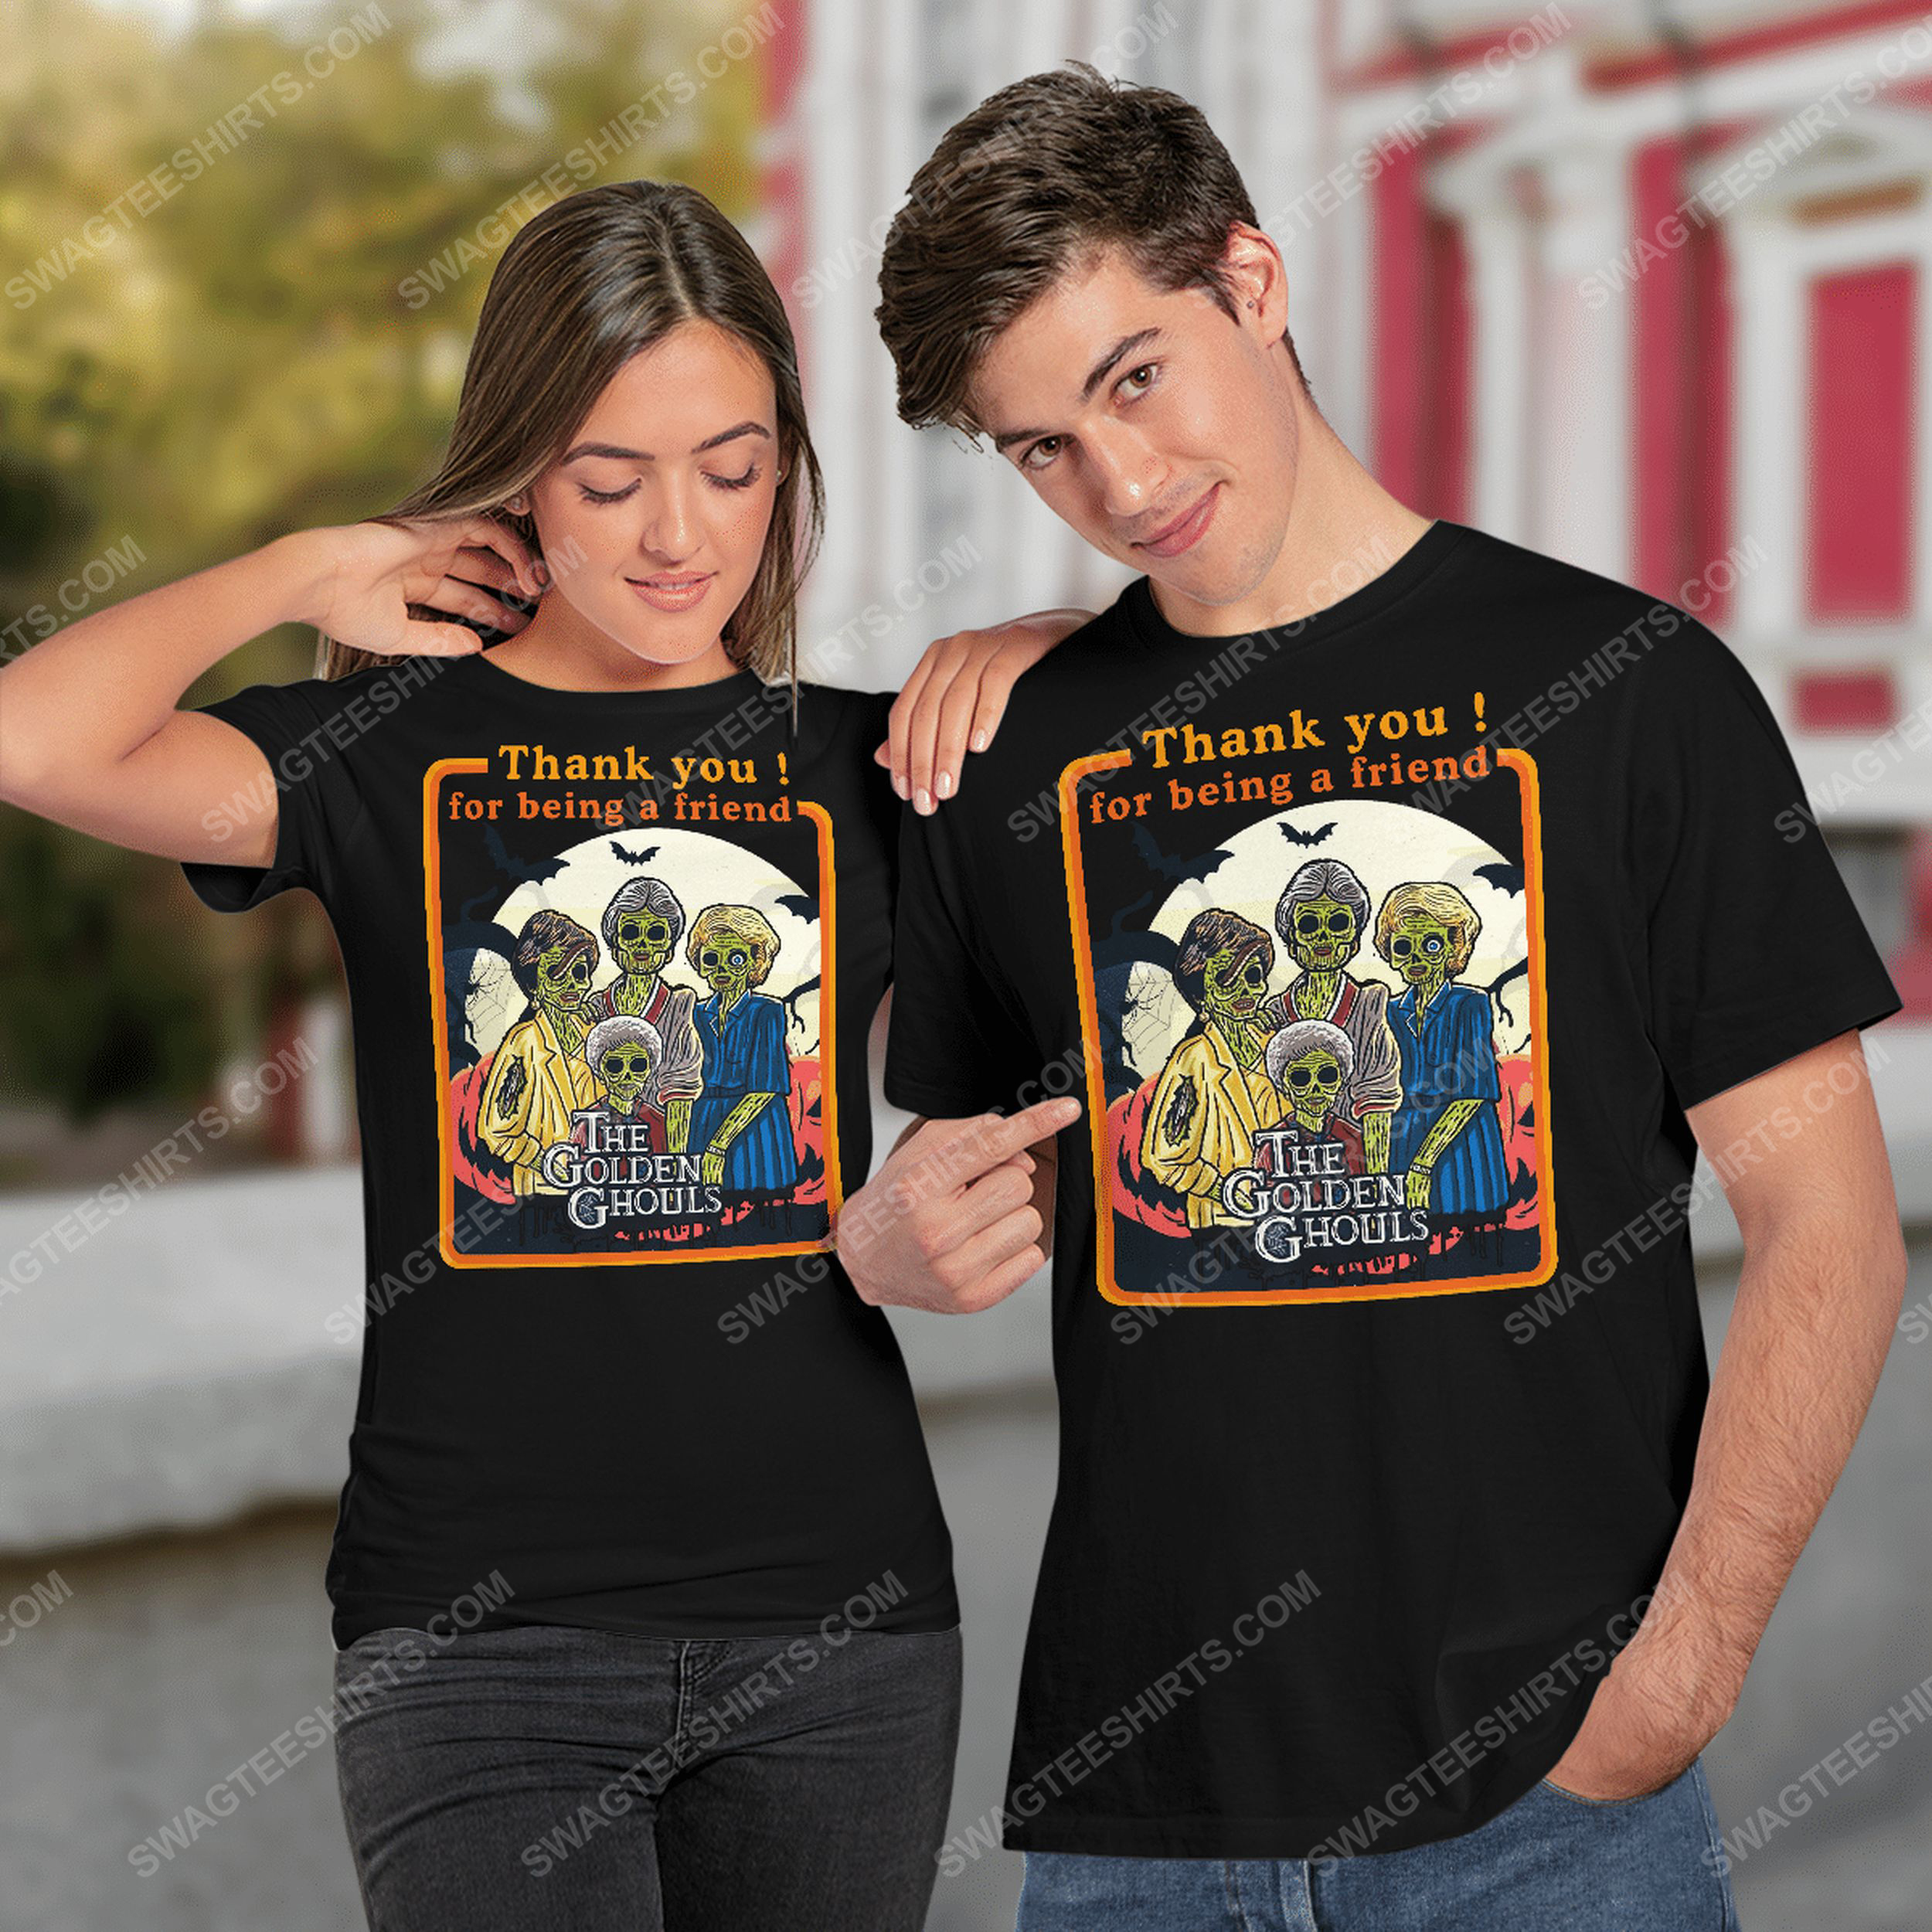 Thank you for being friend golden ghouls the golden girls tshirt(1)